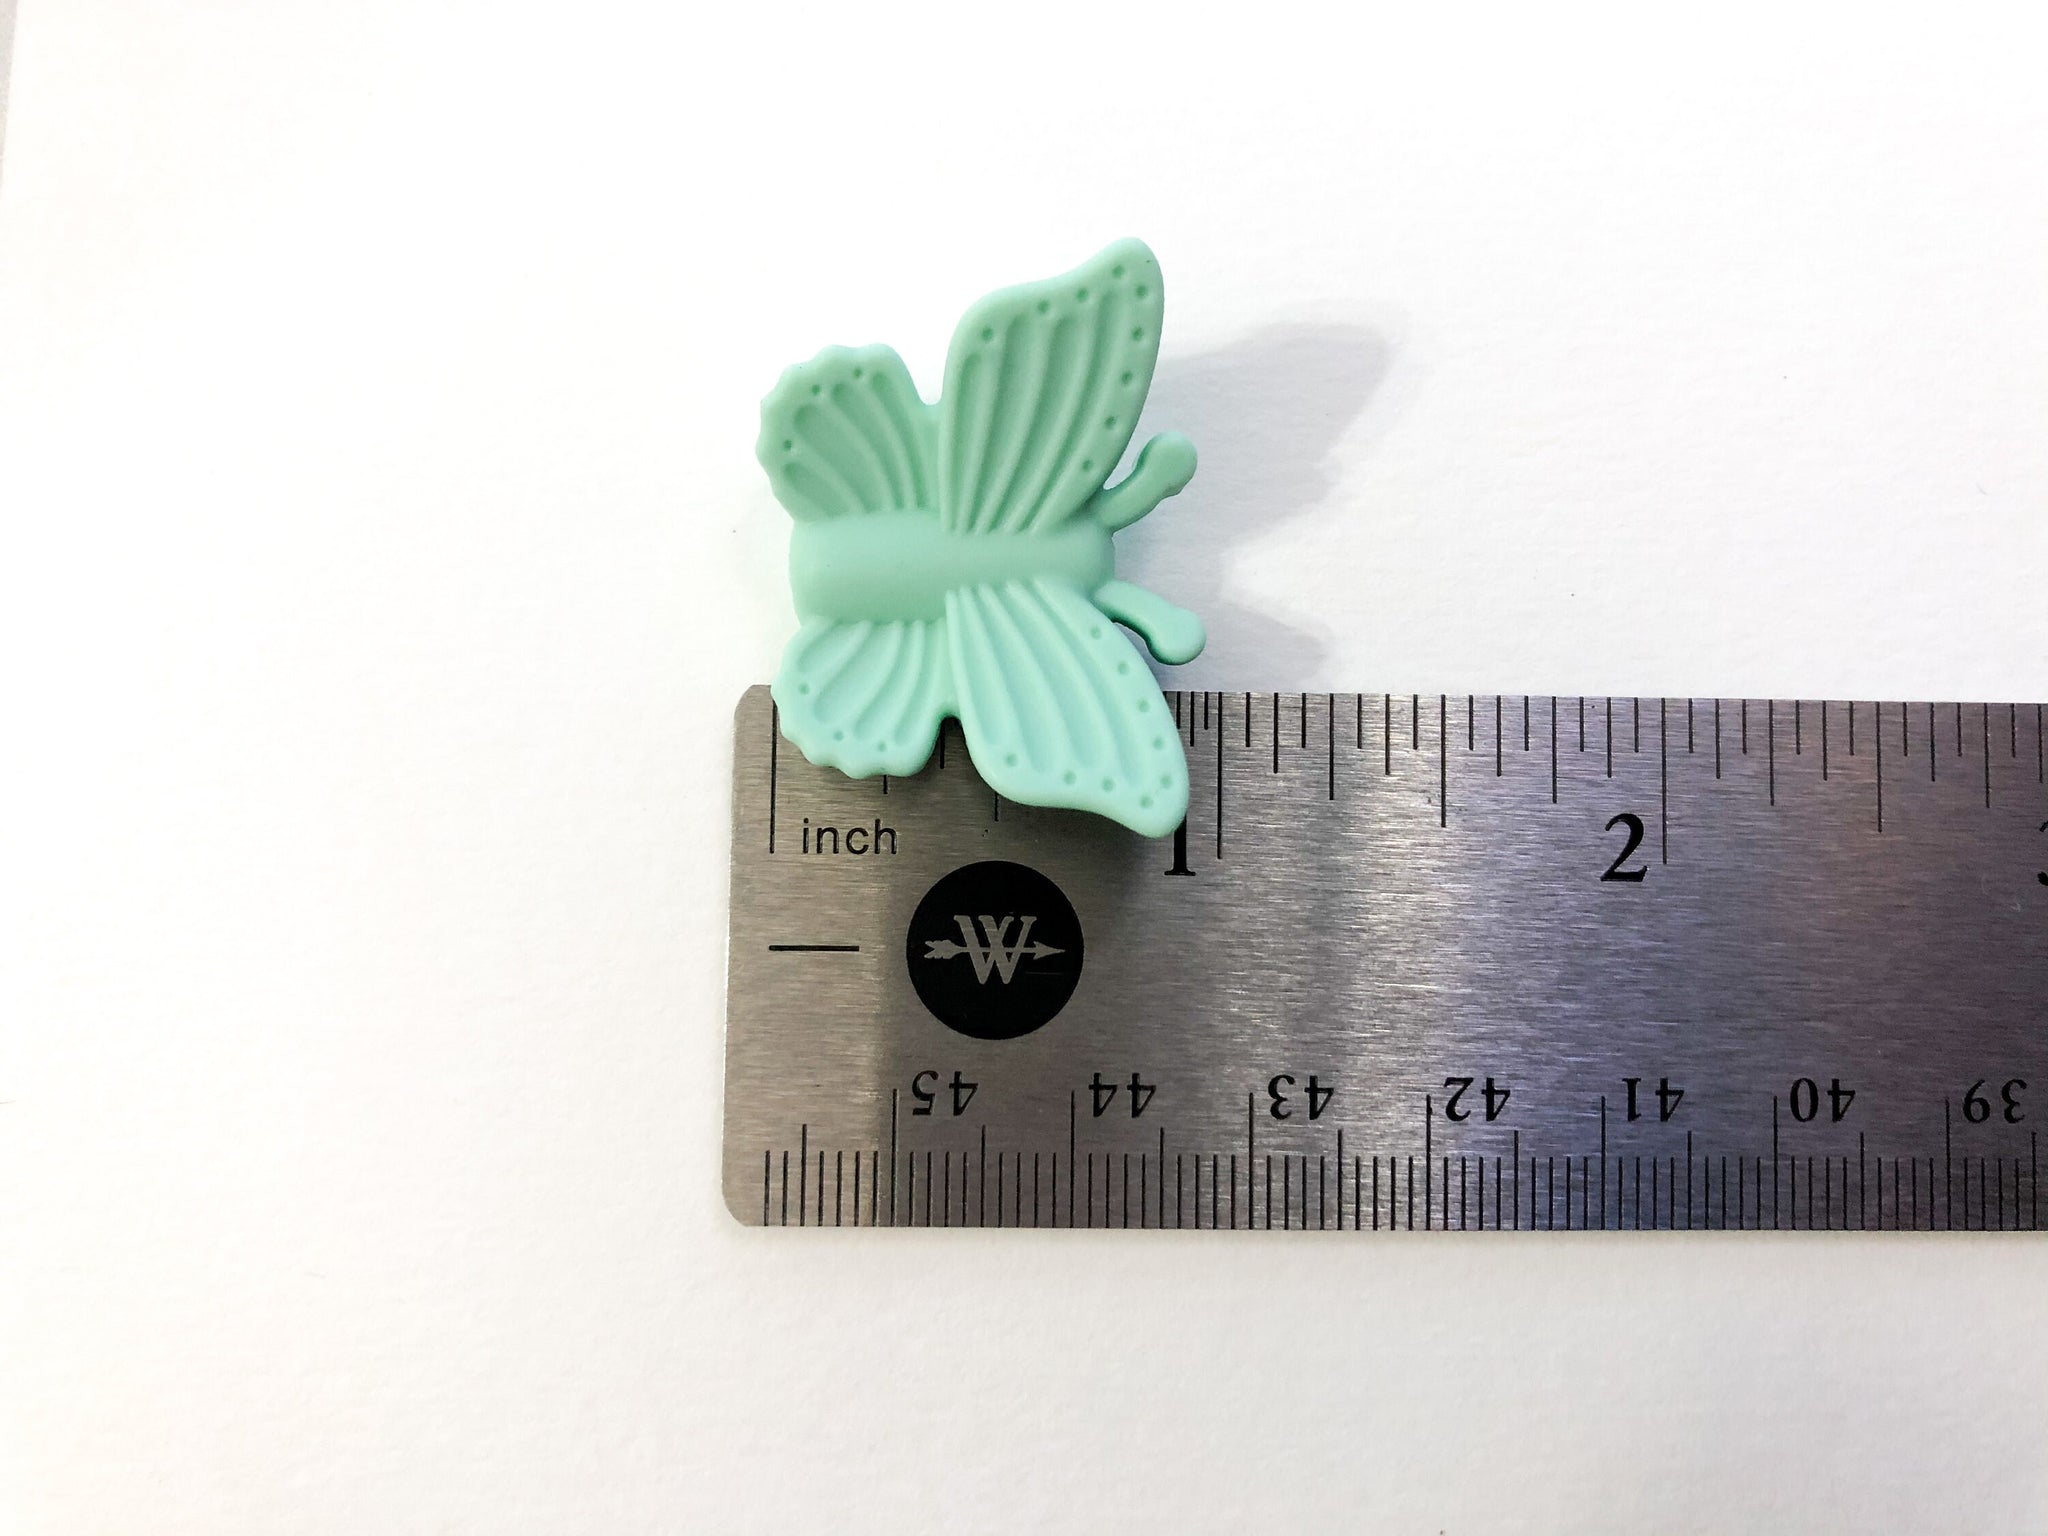 Silicone Quartz Butterfly Beads - Bulk Silicone Beads Wholesale - DIY Jewelry